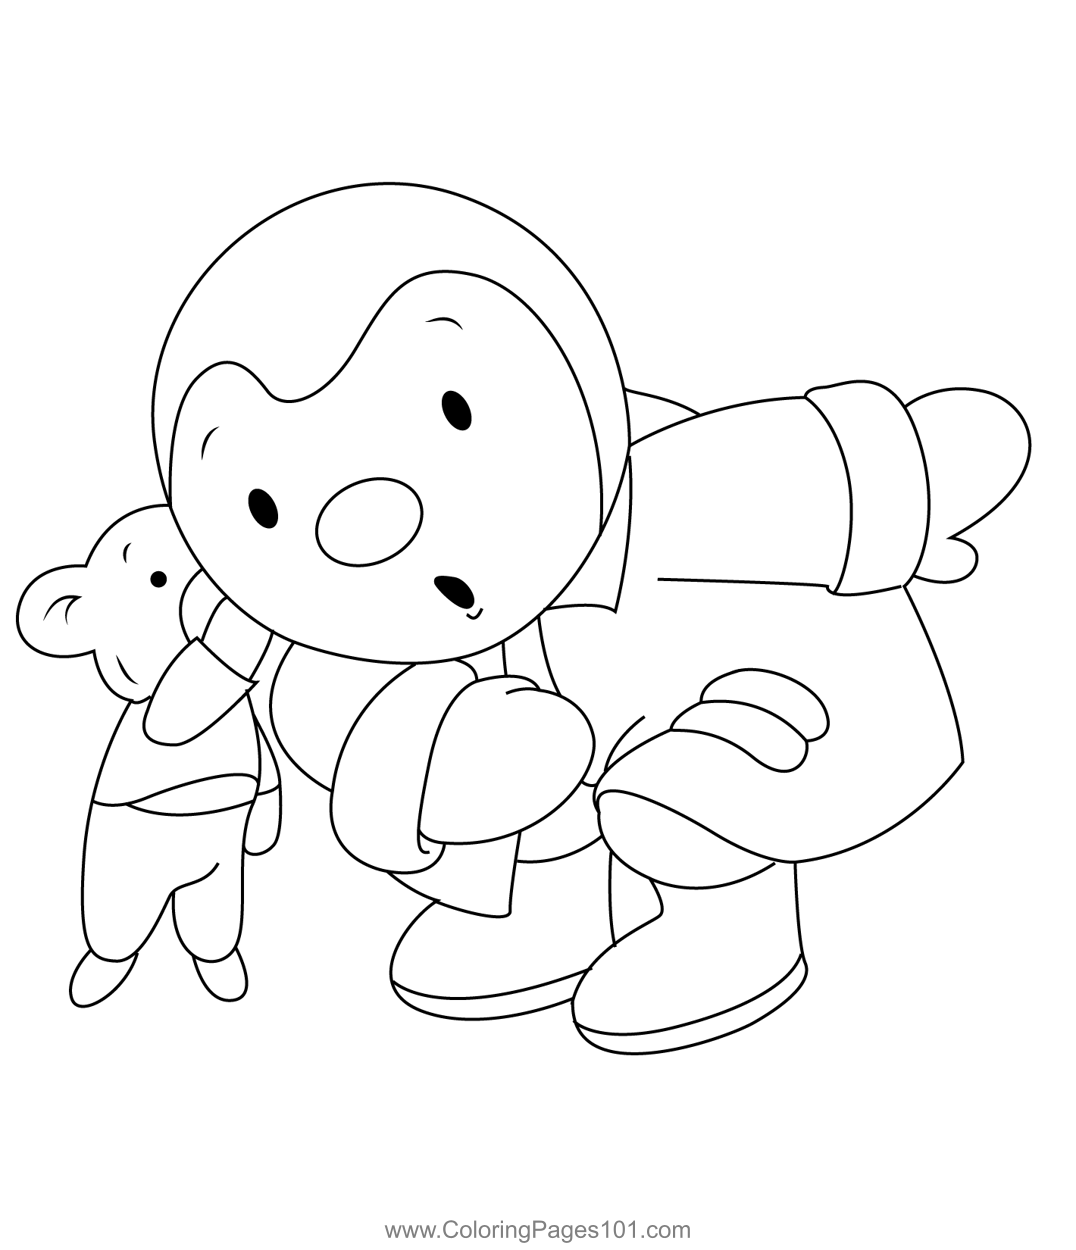 Mimmo Talking To Charley Coloring Page for Kids - Free Charley and ...